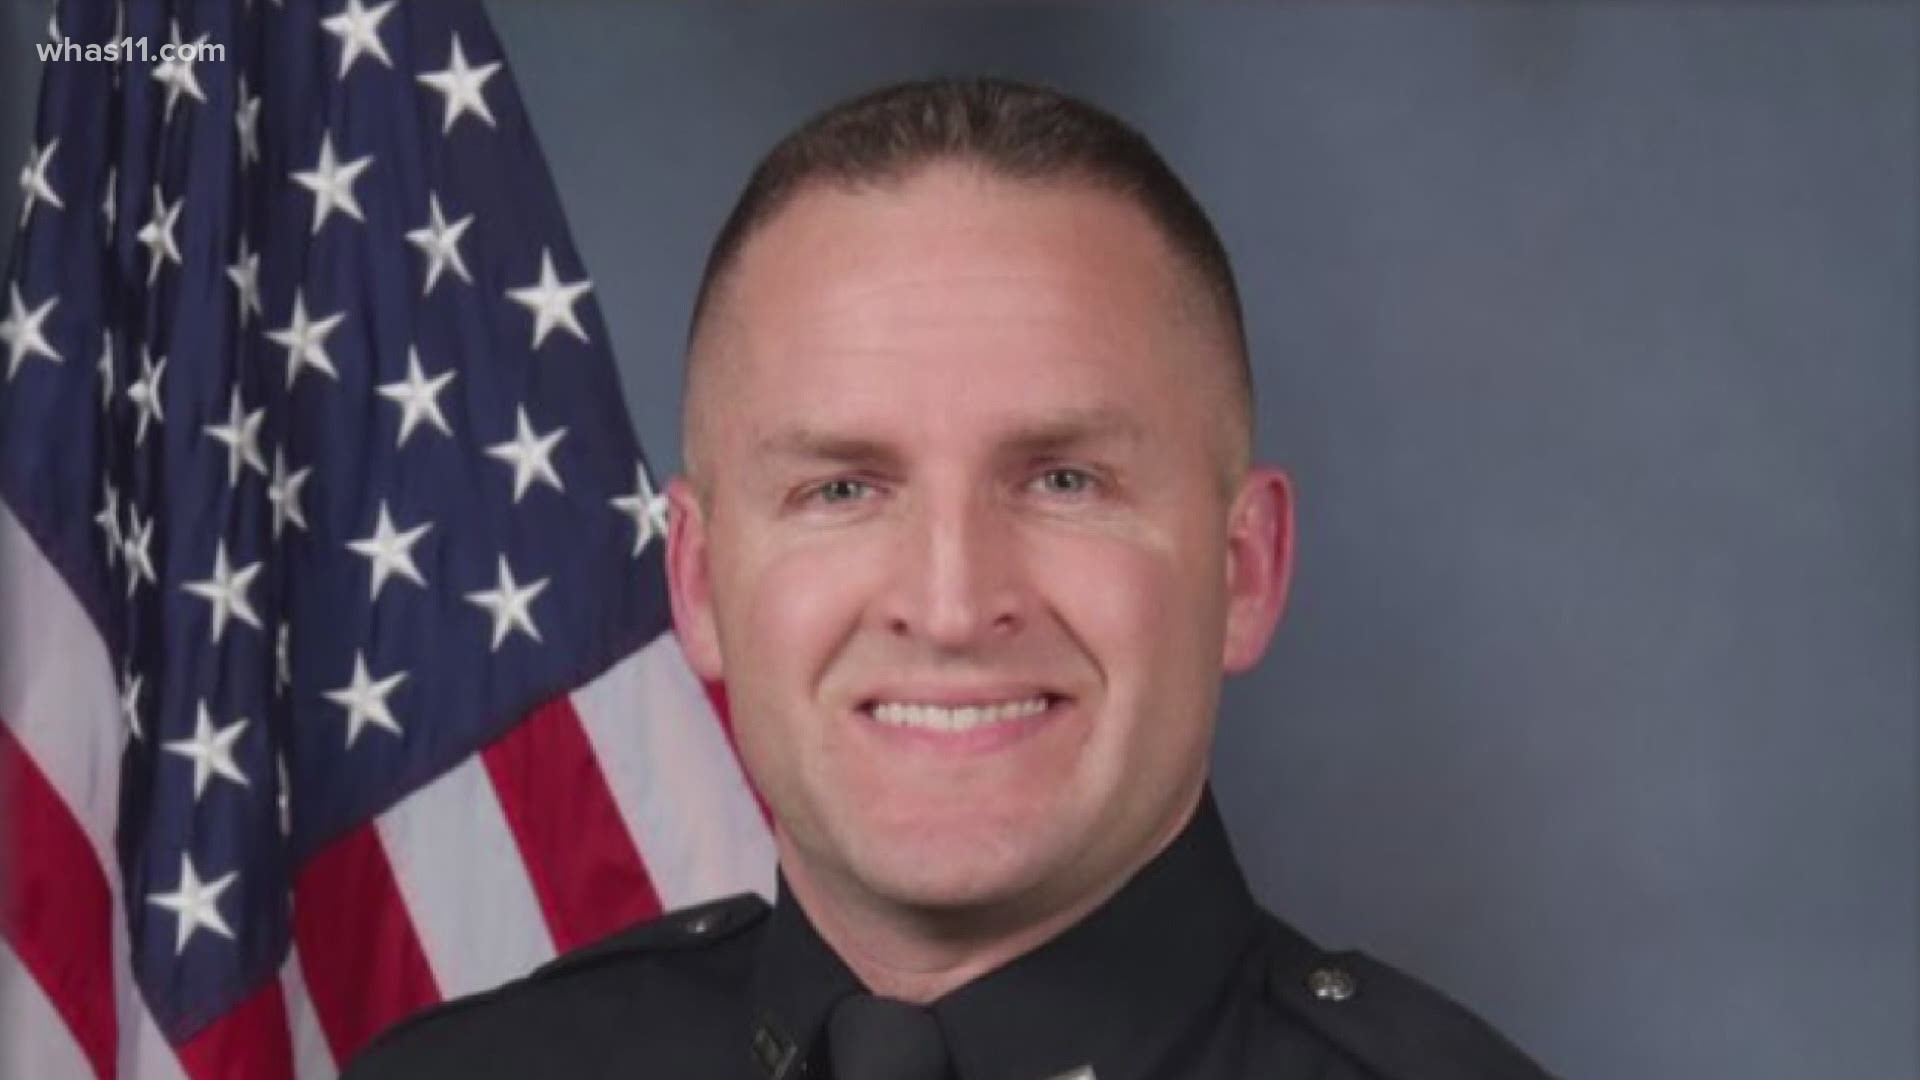 The former officer has more legal headaches after a woman filed a lawsuit accusing him of sexual assault.